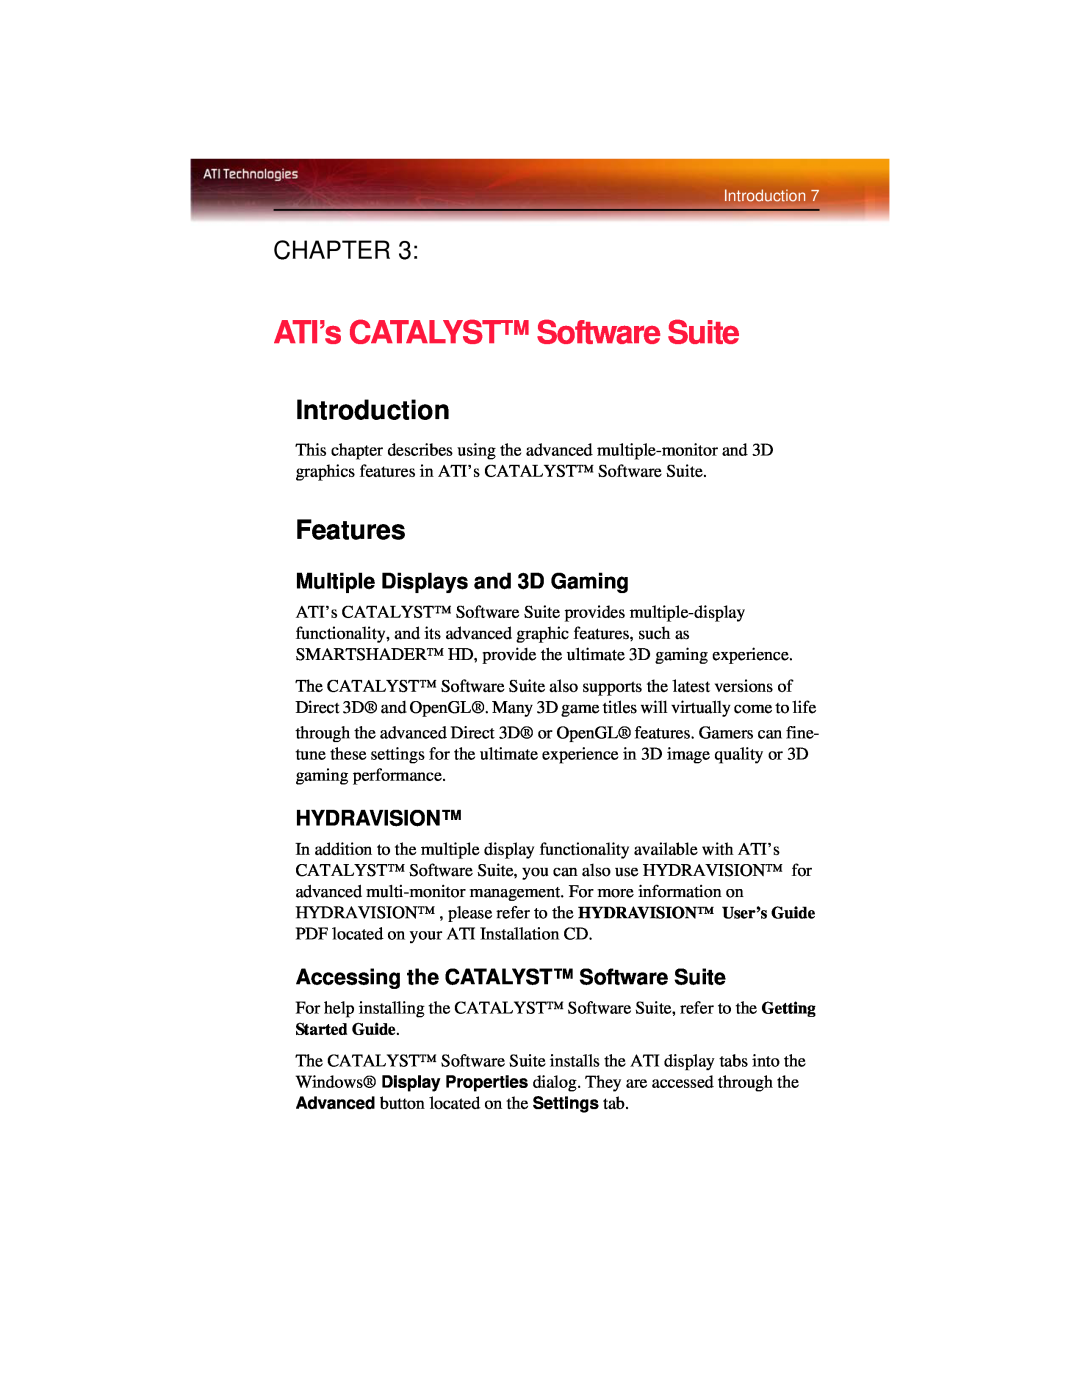 ATI Technologies X600 ATI’s CATALYST Software Suite, Introduction, Features, Multiple Displays and 3D Gaming, Hydravision 